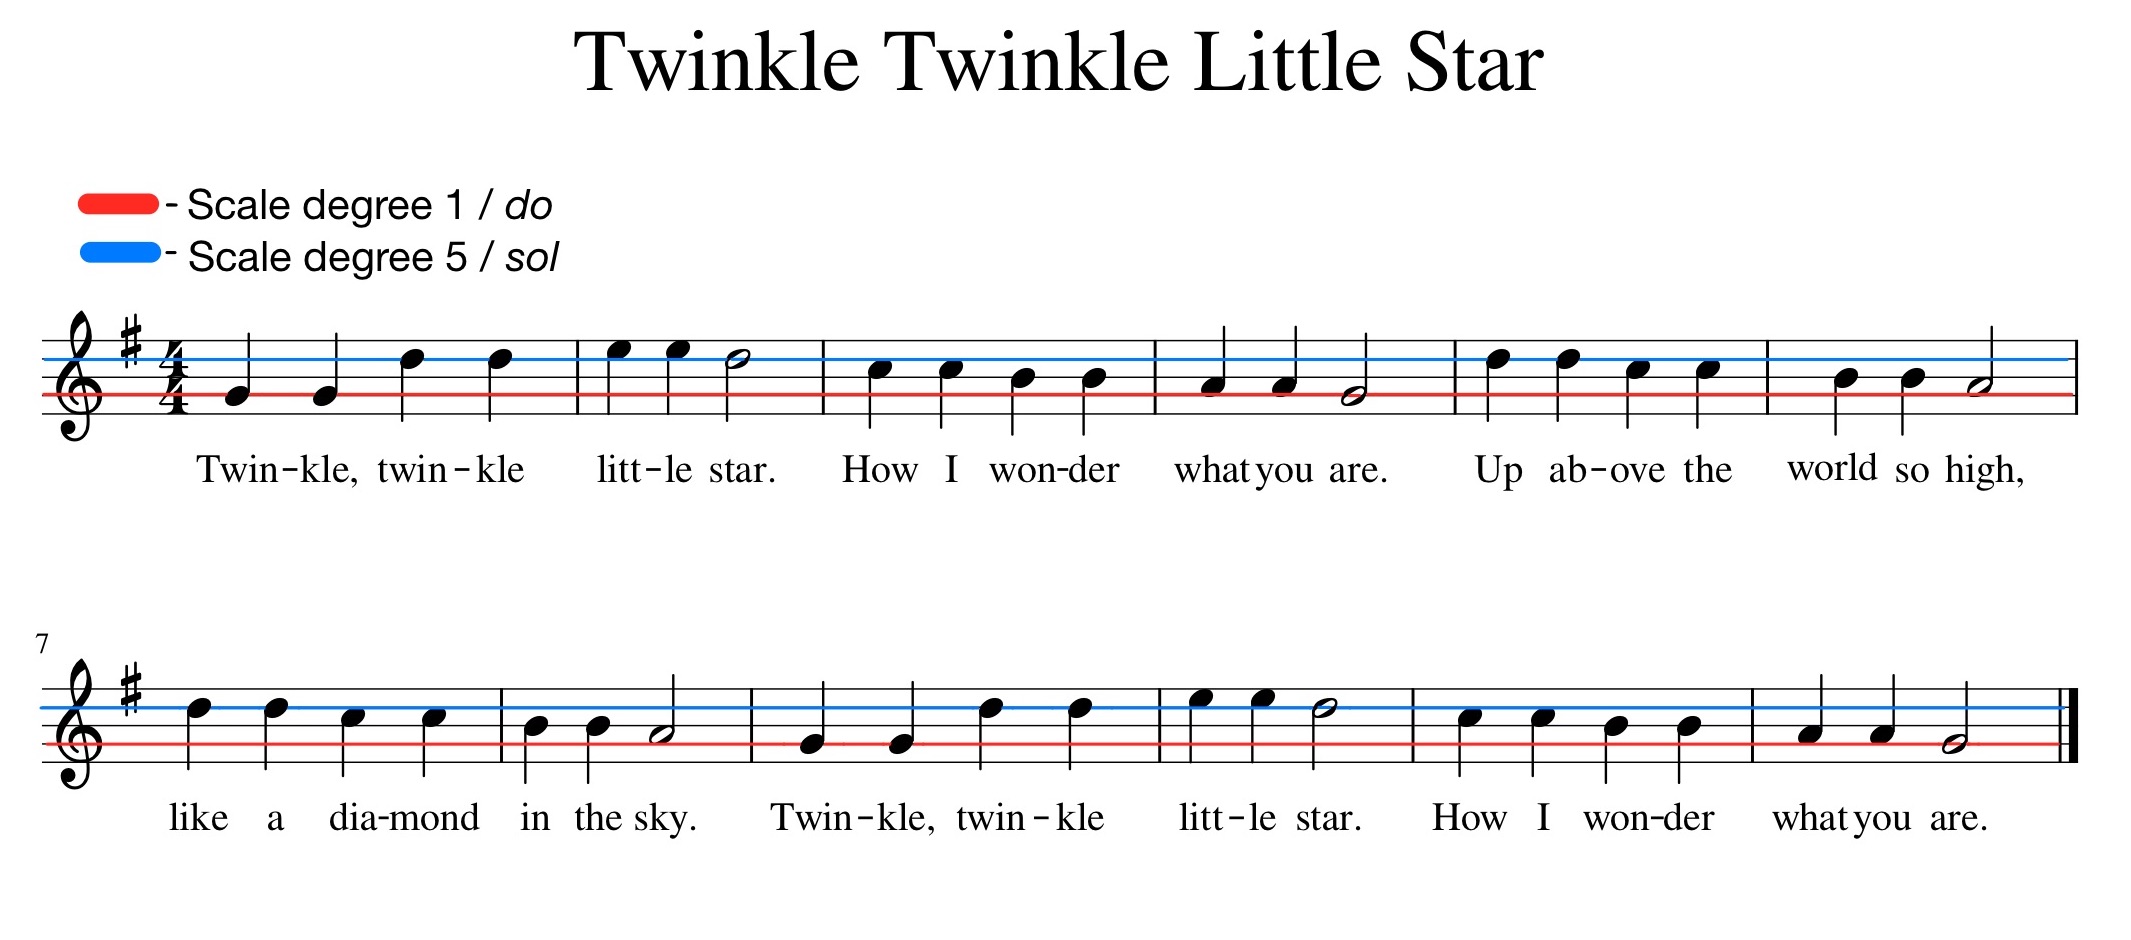 Notated music for Twinkle Twinkle Little Star with scale degree 1/do highlighted in red and scale degree 5/sol in blue.